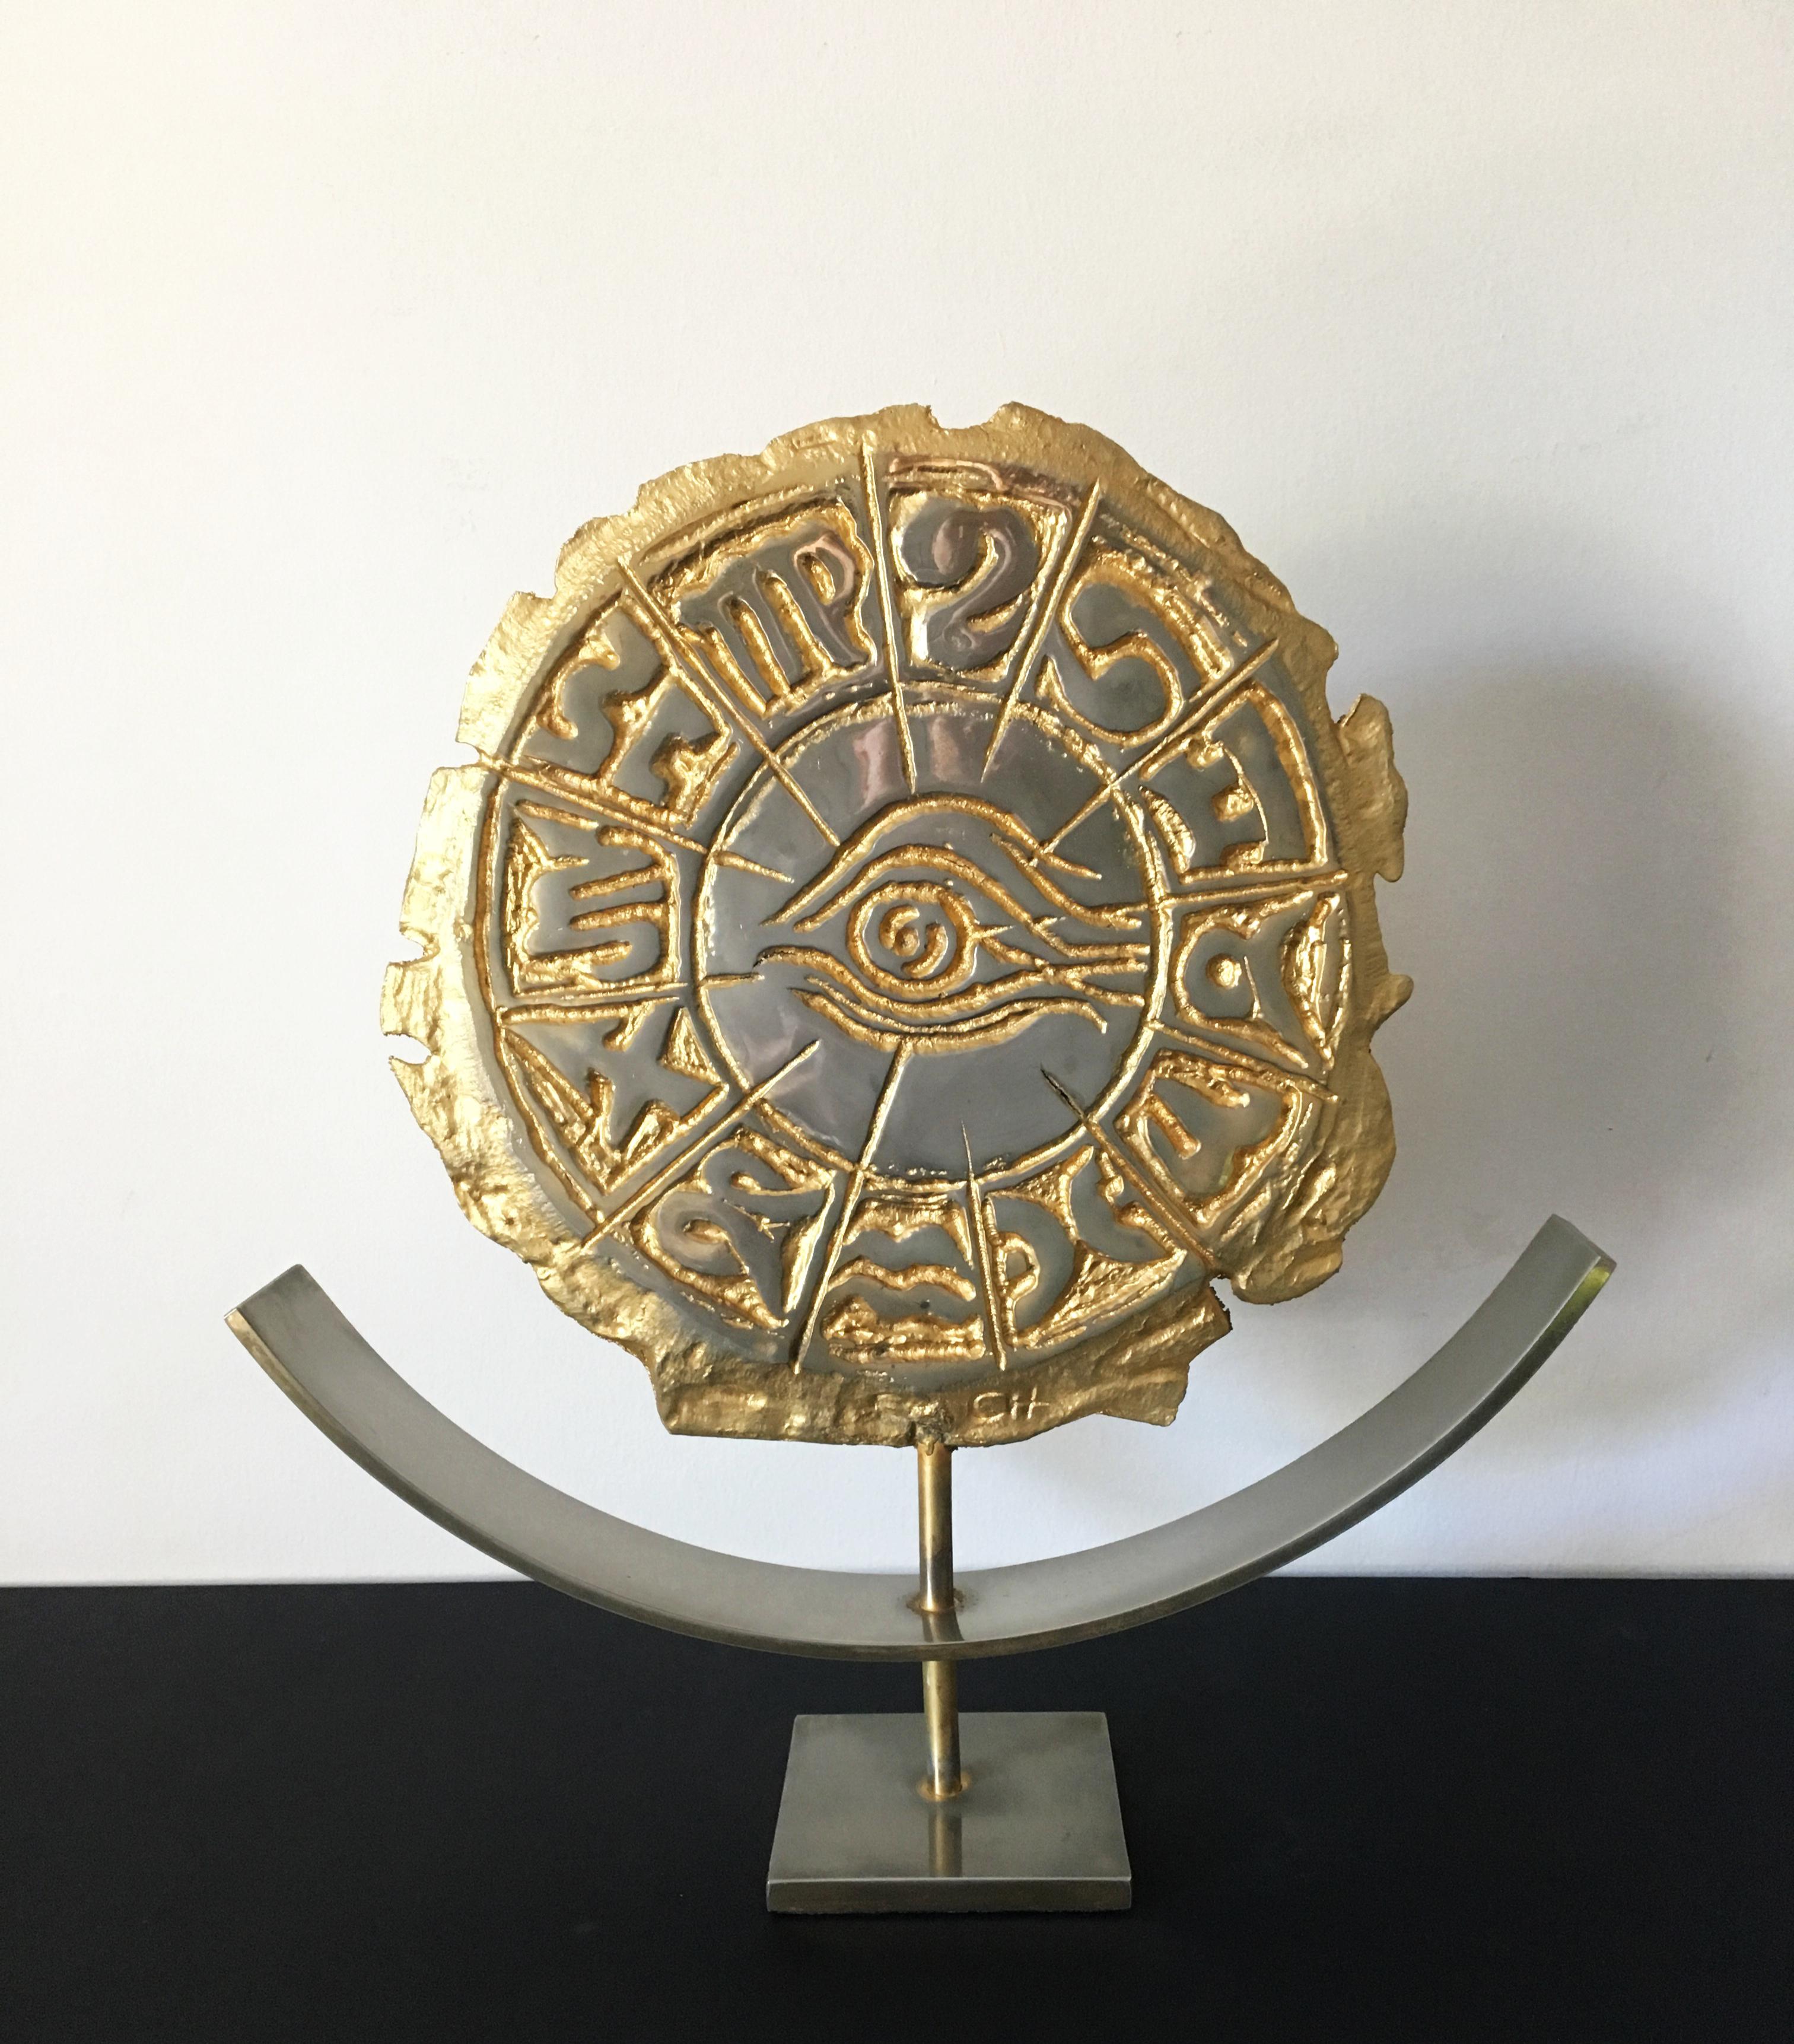 Philippe Cheverny Zodiac Sculpture Signed Philippe Cherverny Cast Metal, Gilded In Good Condition For Sale In Somerton, GB